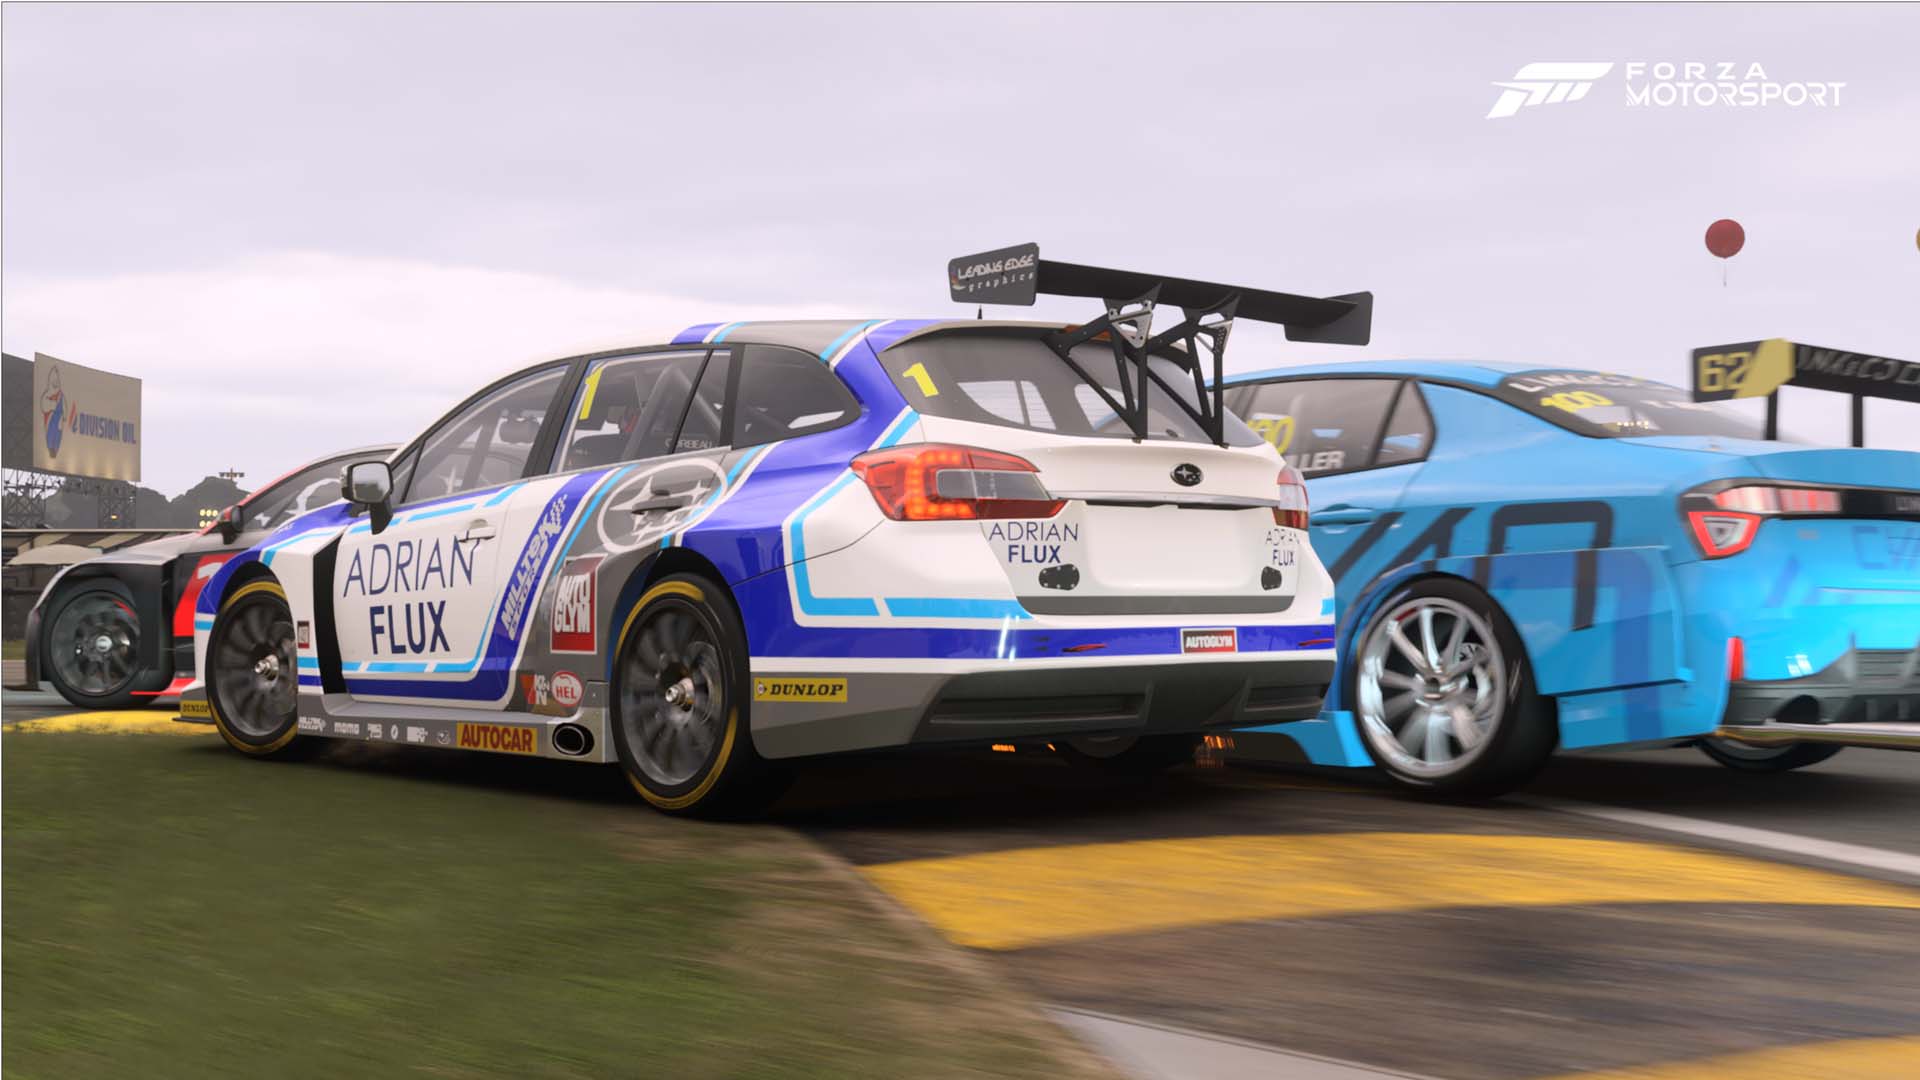 Forza Motorsport Release Timing – Forza Support